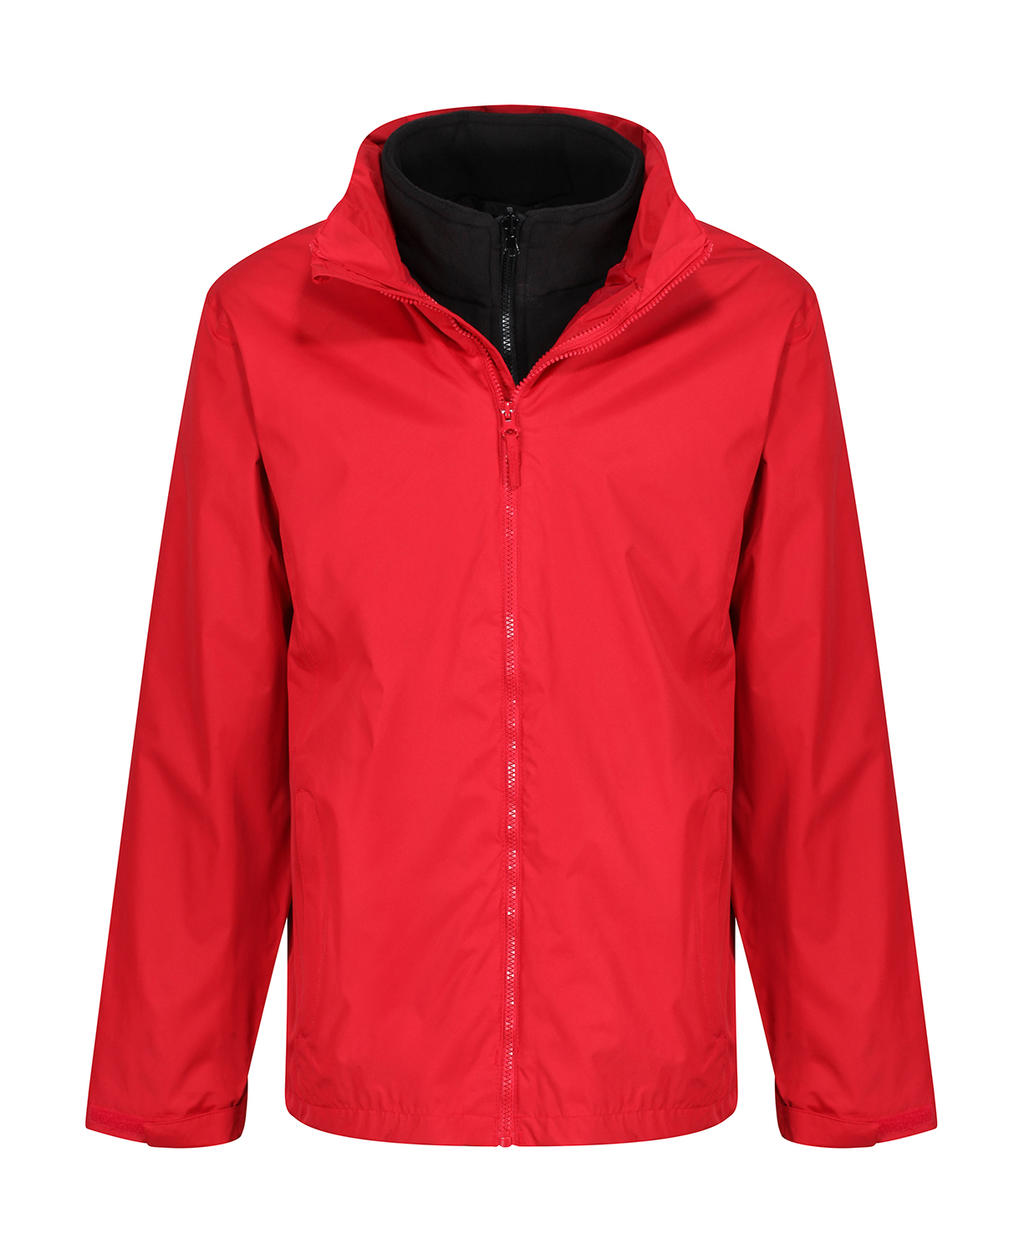  Classic 3-in-1 Jacket in Farbe Classic Red